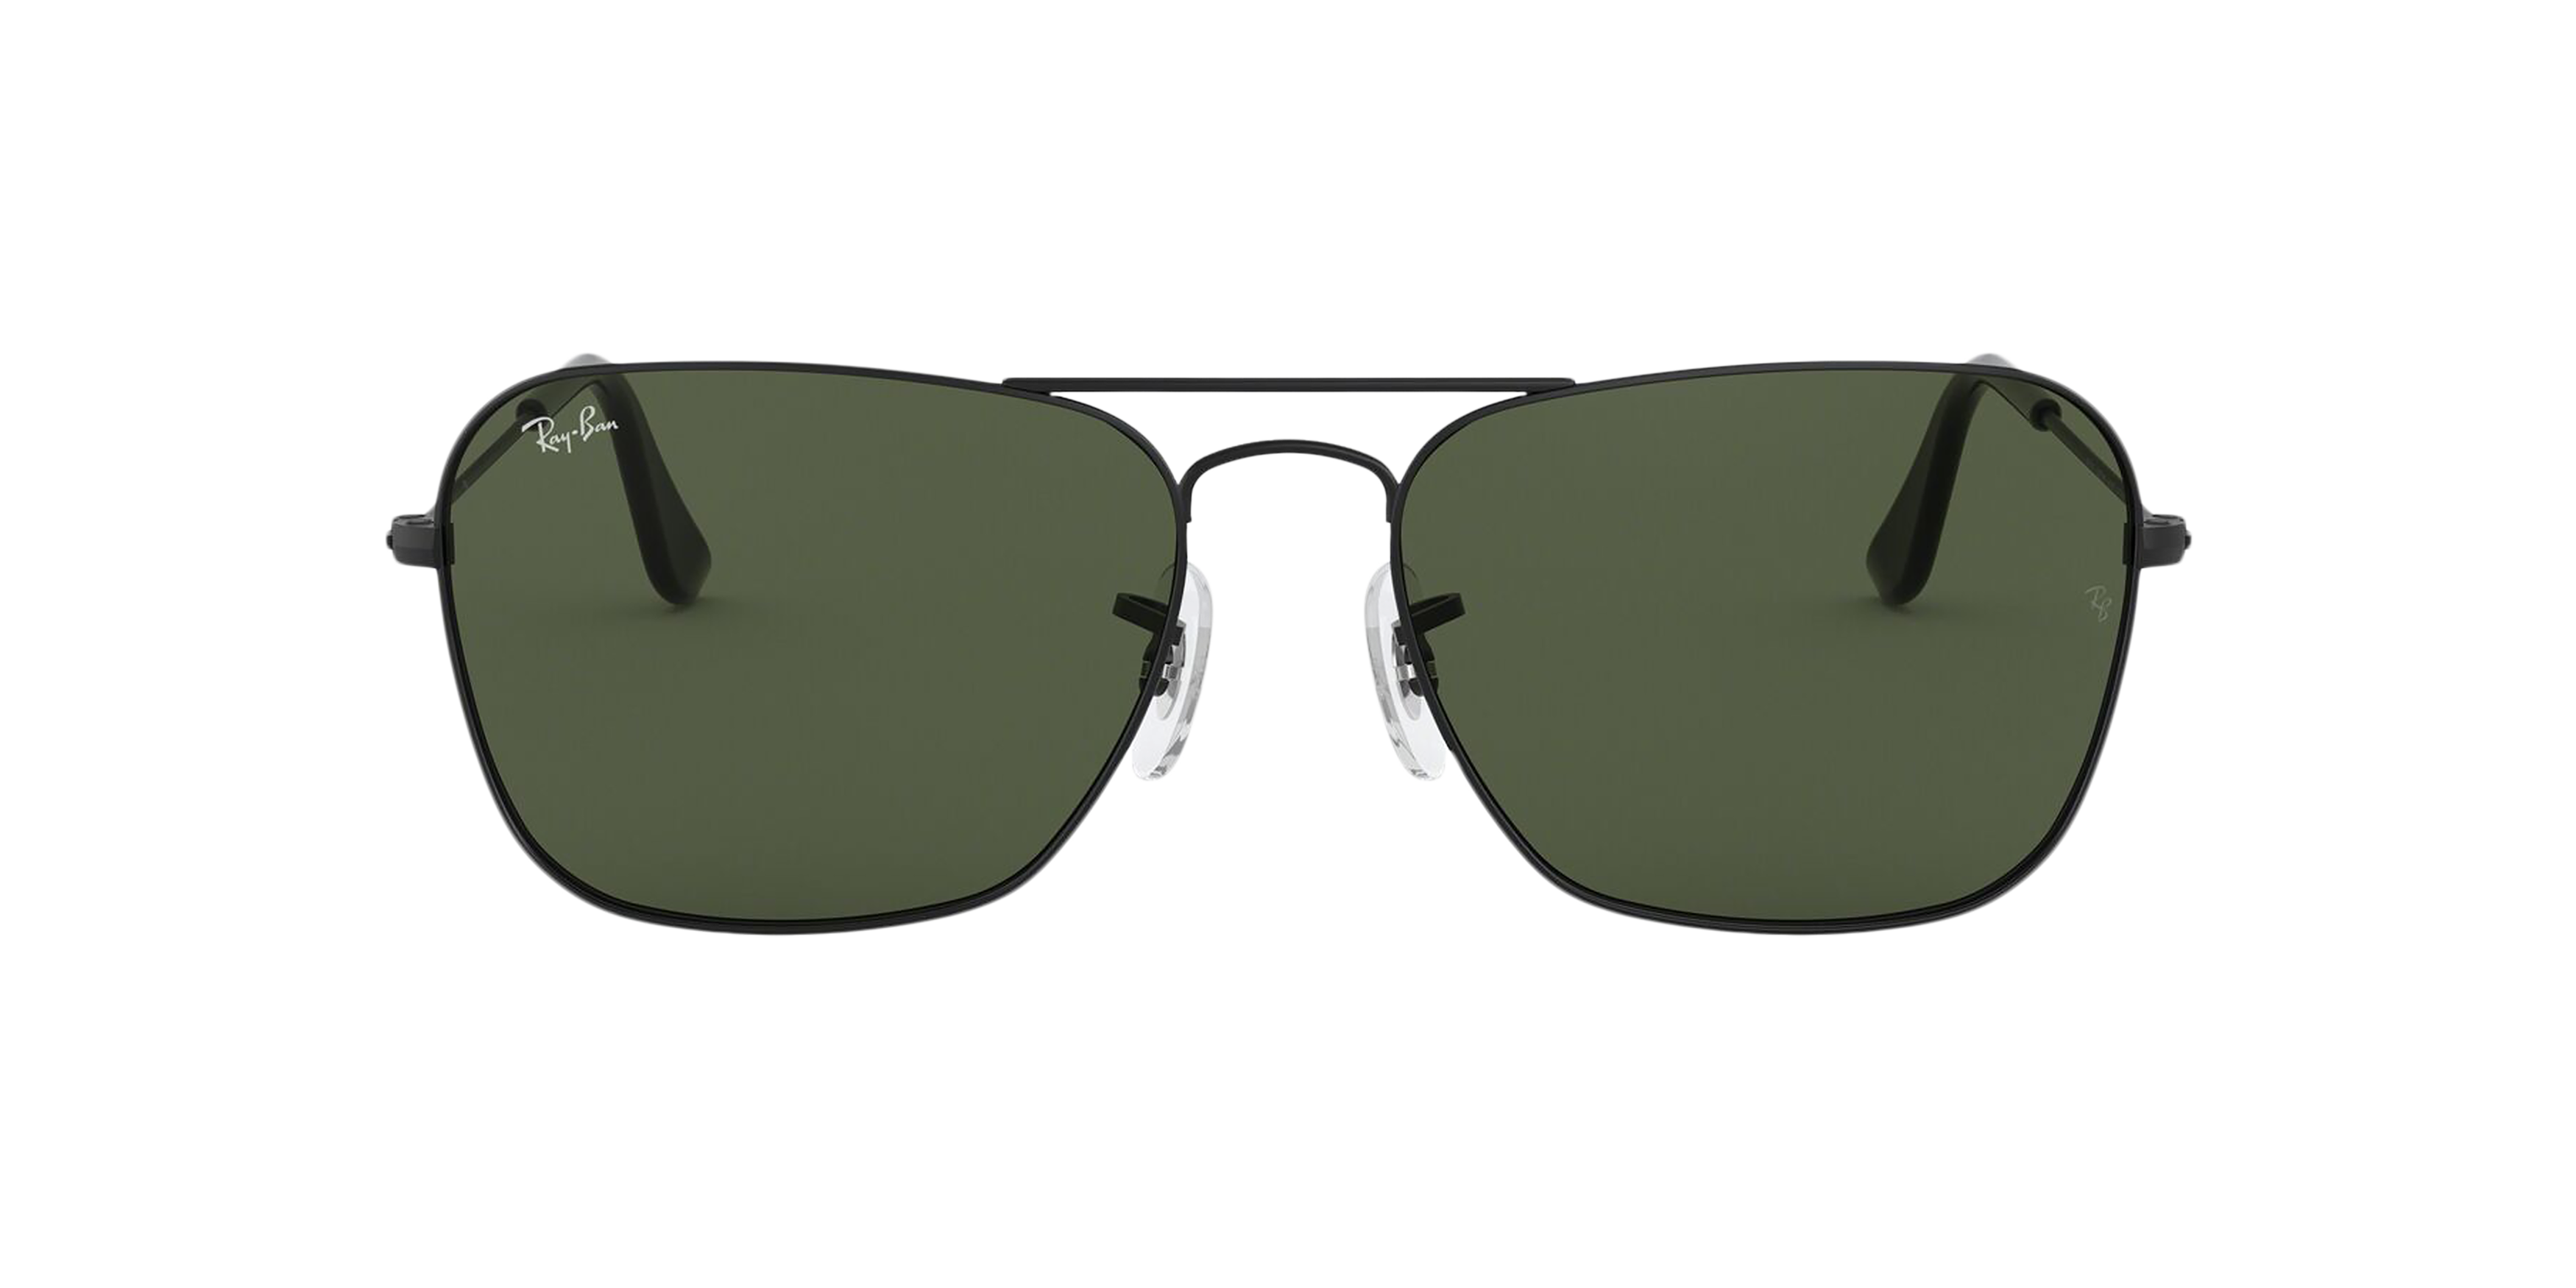 [products.image.front] Ray-Ban Caravan RB3136 W3338